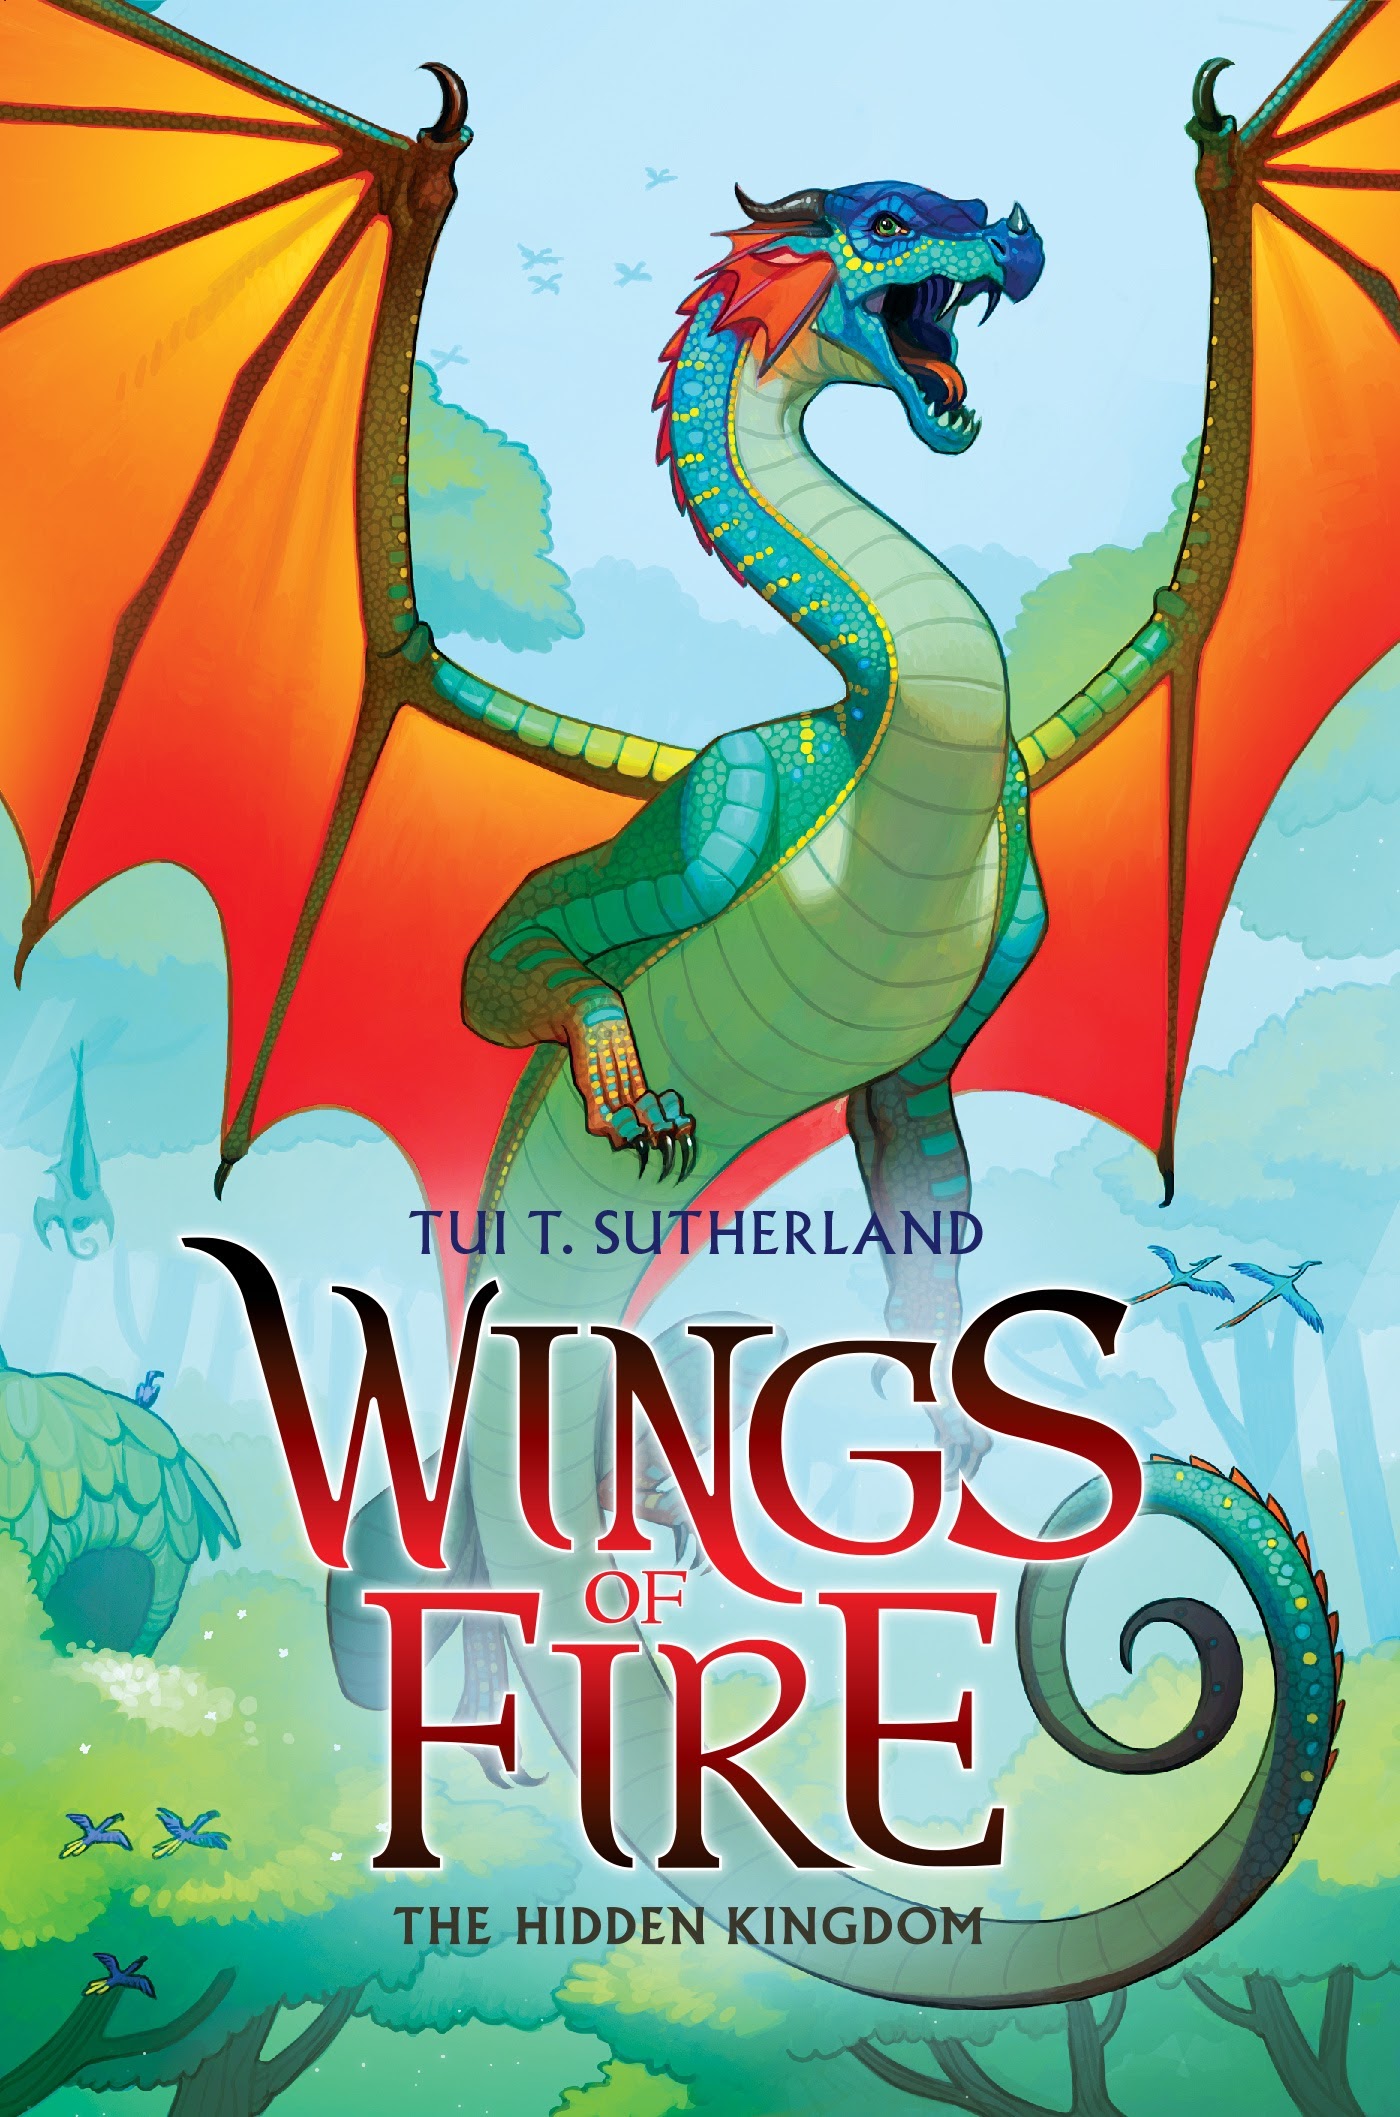 book review of the book wings of fire